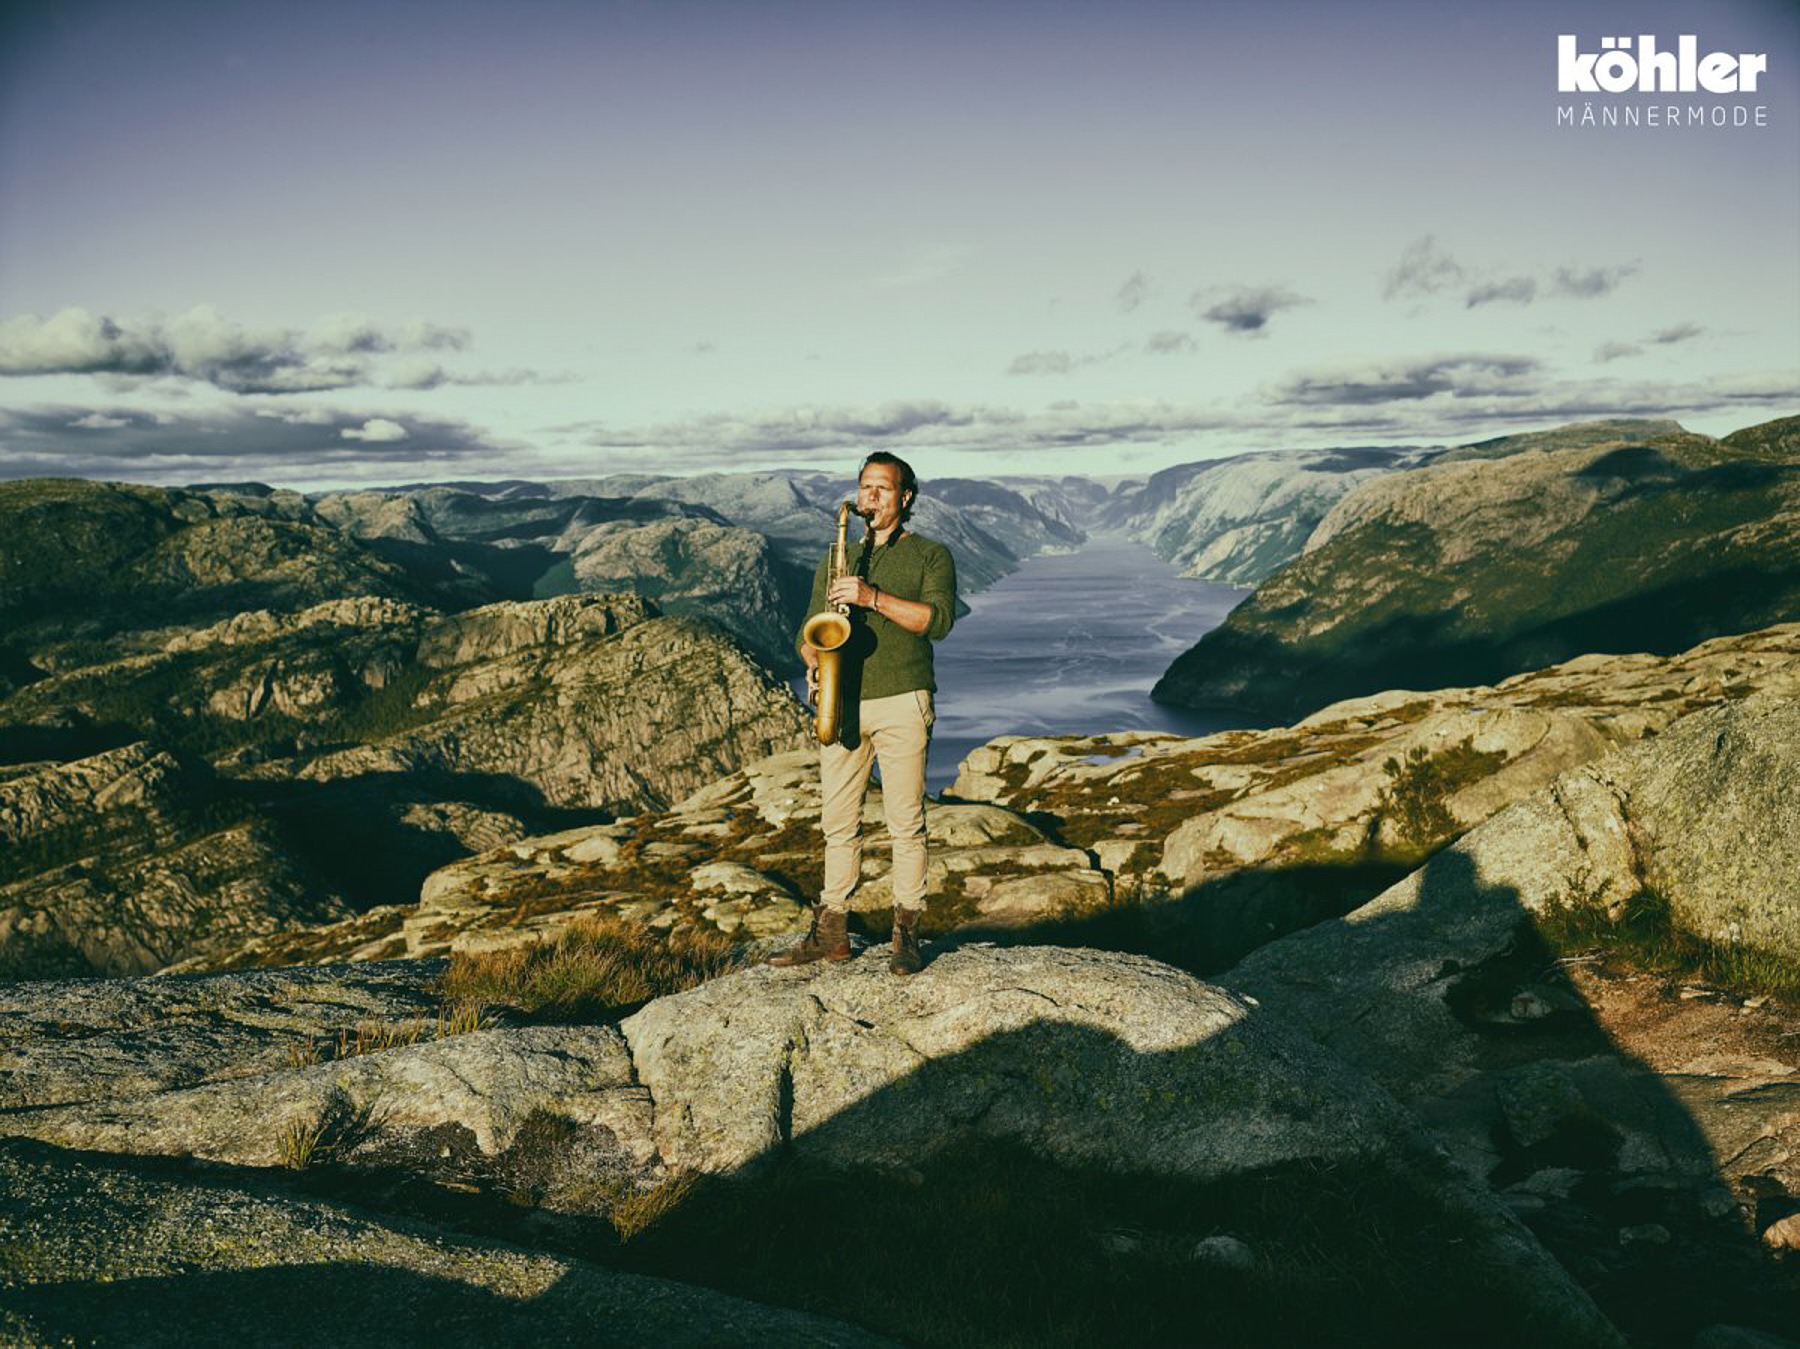 köhler musicians campaign norway (10 images) by Mike Meyer Photography